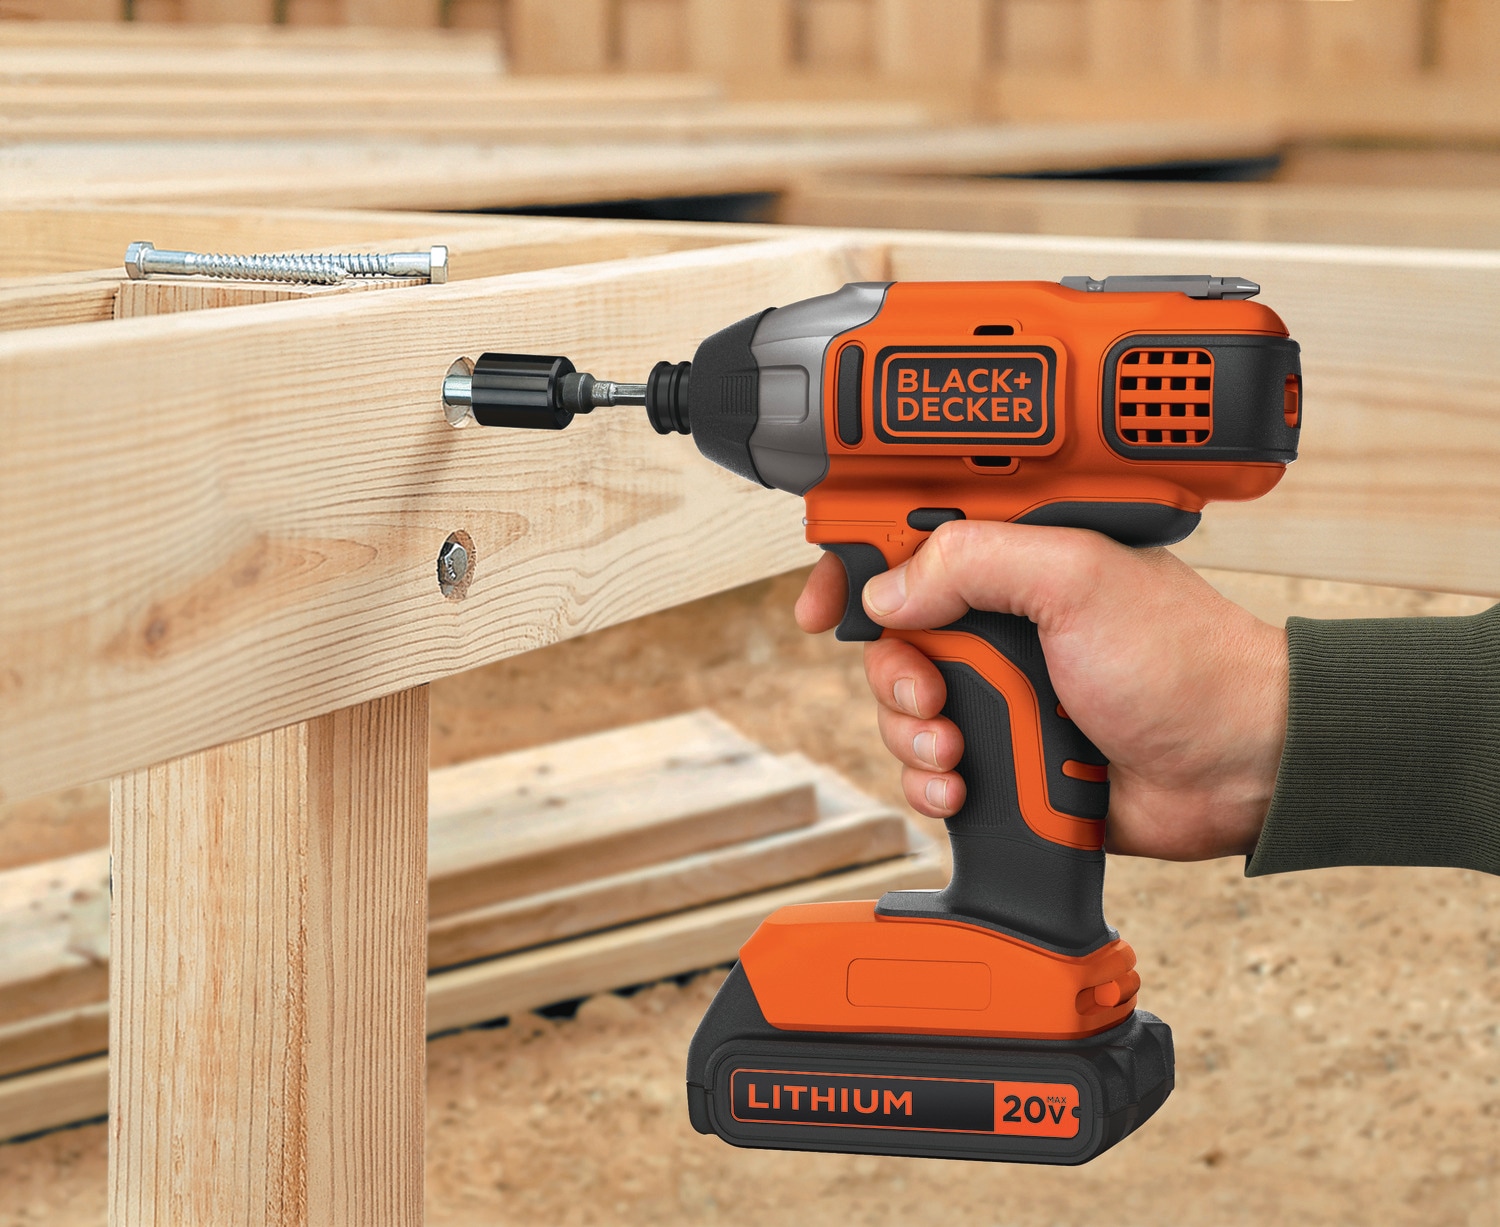 BLACK+DECKER 20-Volt Cordless Drill with Battery/Charger - Bitplaza Inc